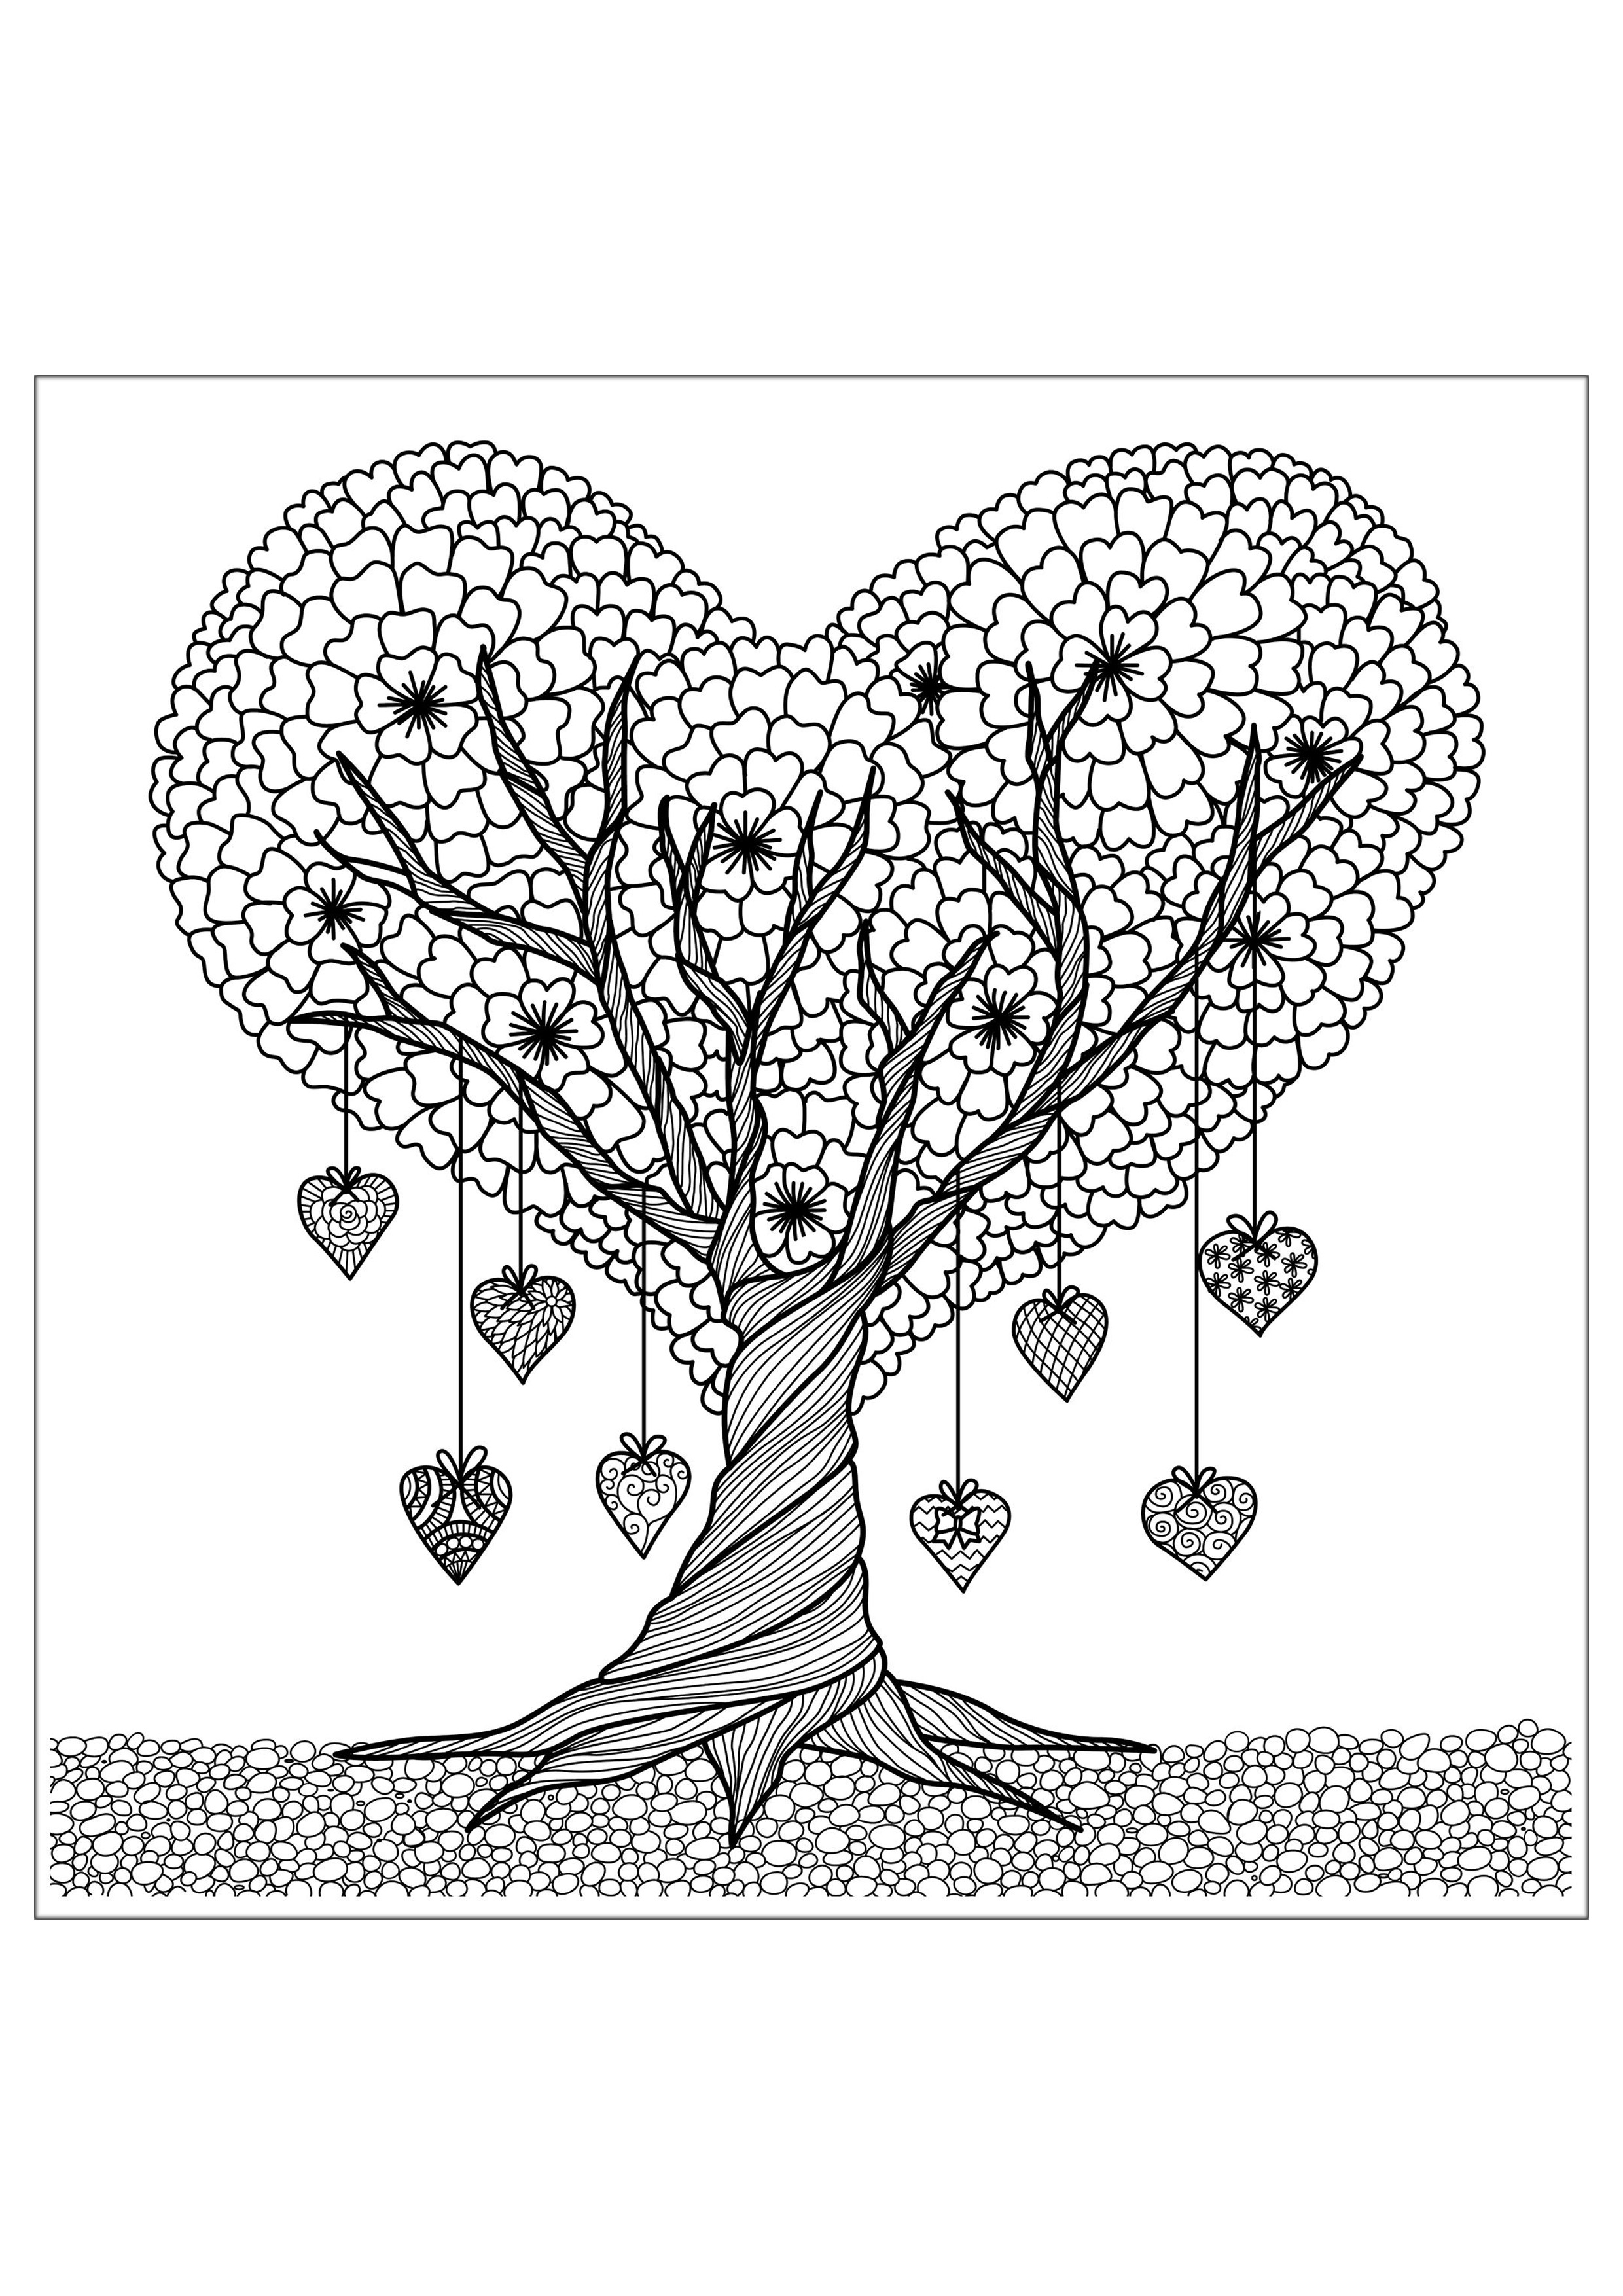 Download Heart - Coloring Pages for Adults